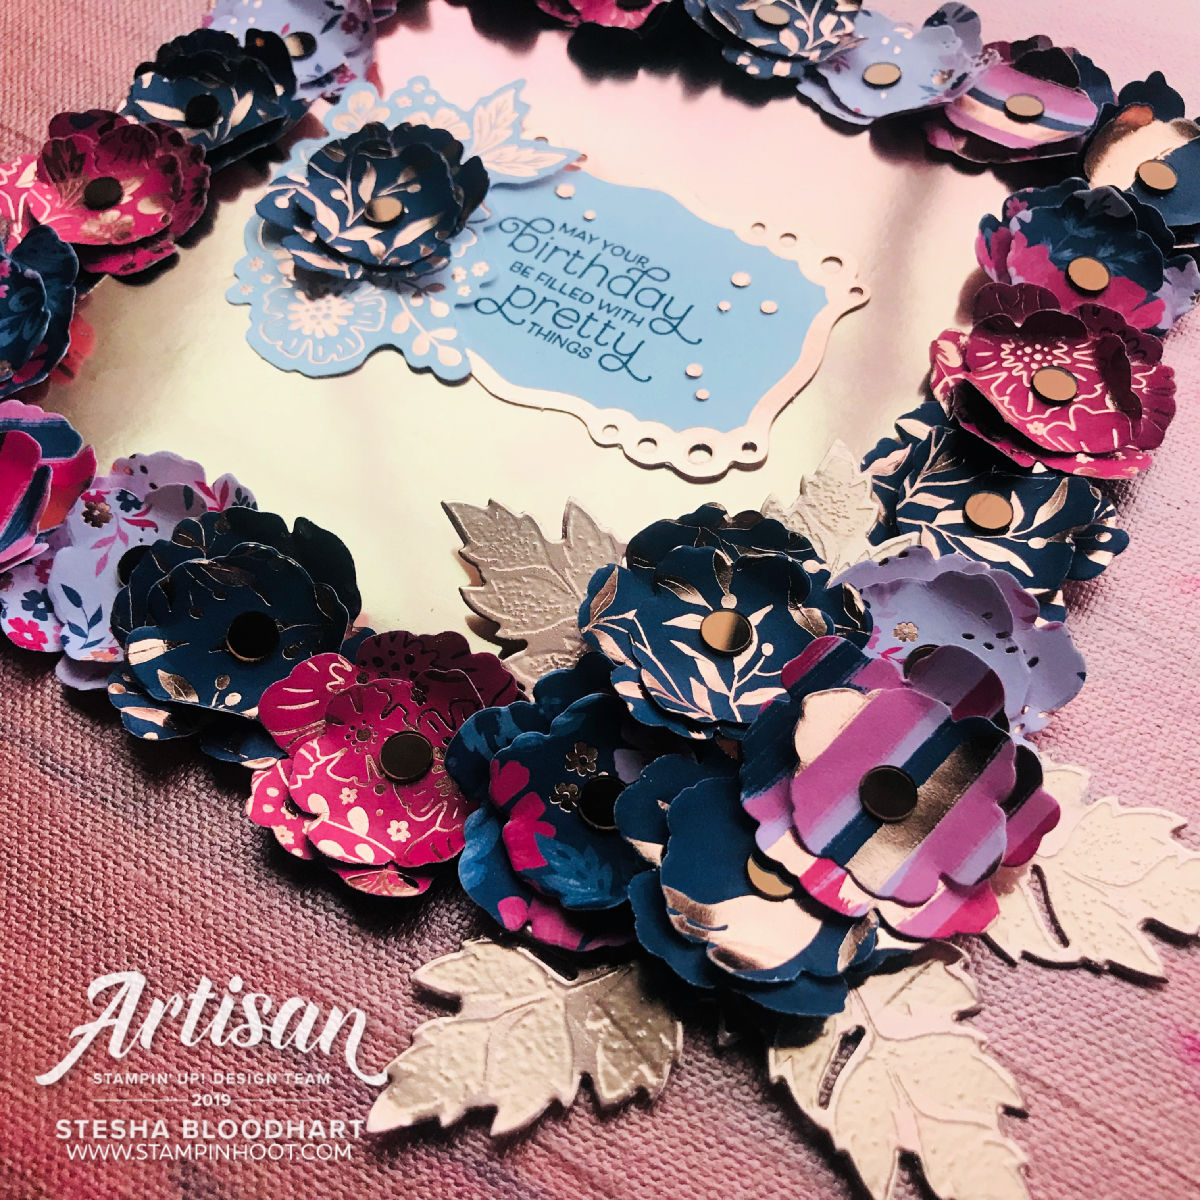 Everything is Rosy Product Medley Artisan Design Team Blog Hop May 1 2019 - Stesha Bloodhart, Stampin' Hoot!